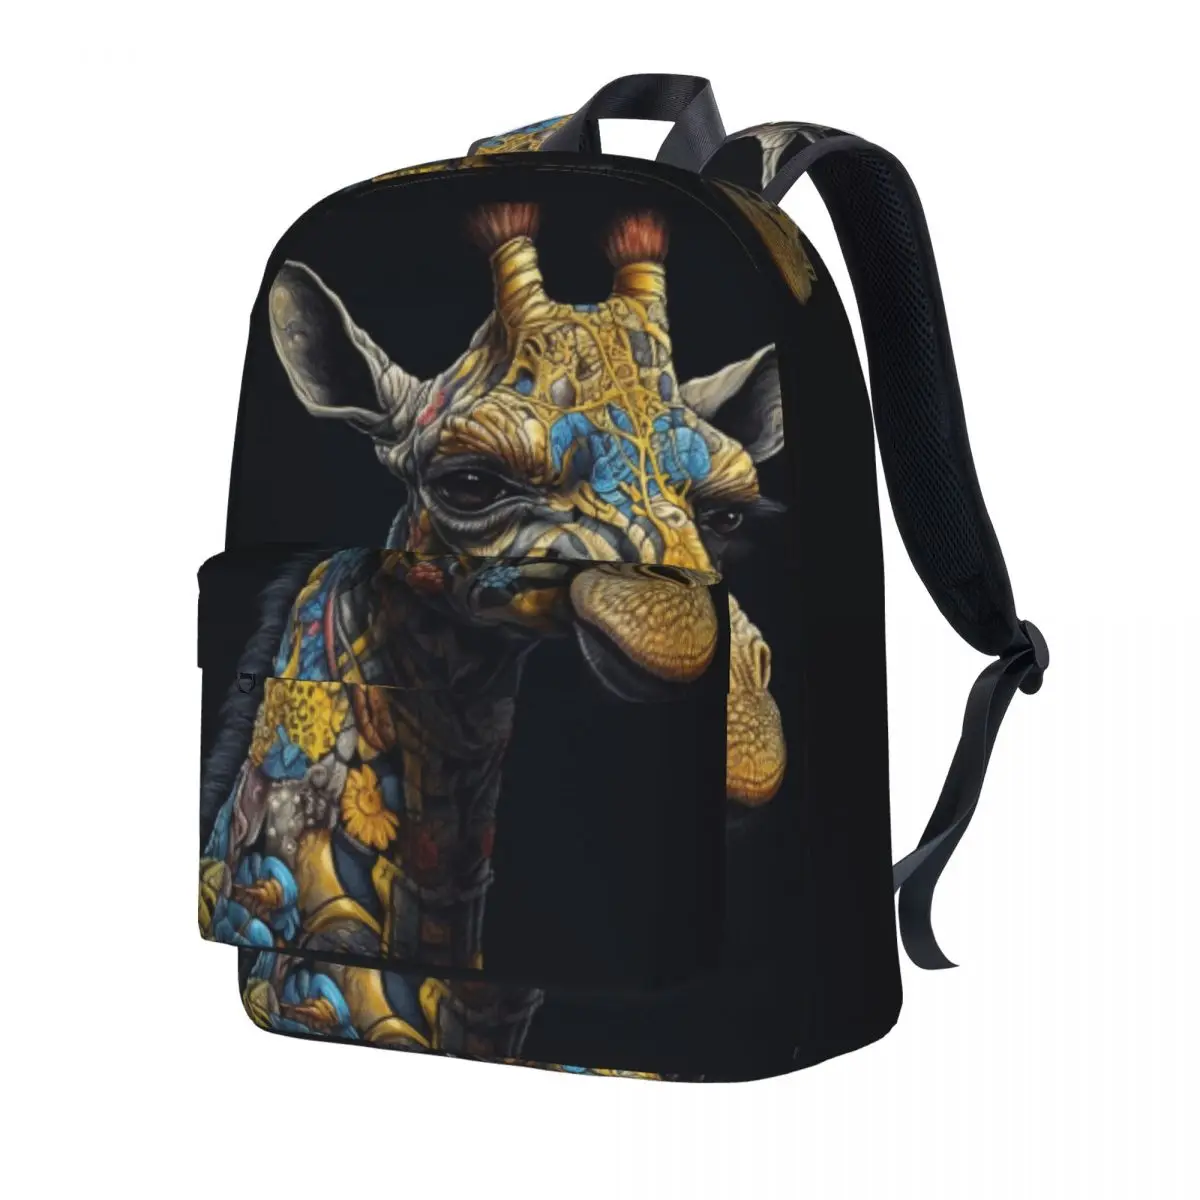 

Giraffe Backpack Unisex Zombie Portraits Soft Backpacks Polyester Cute High School Bags Outdoor Style Design Rucksack